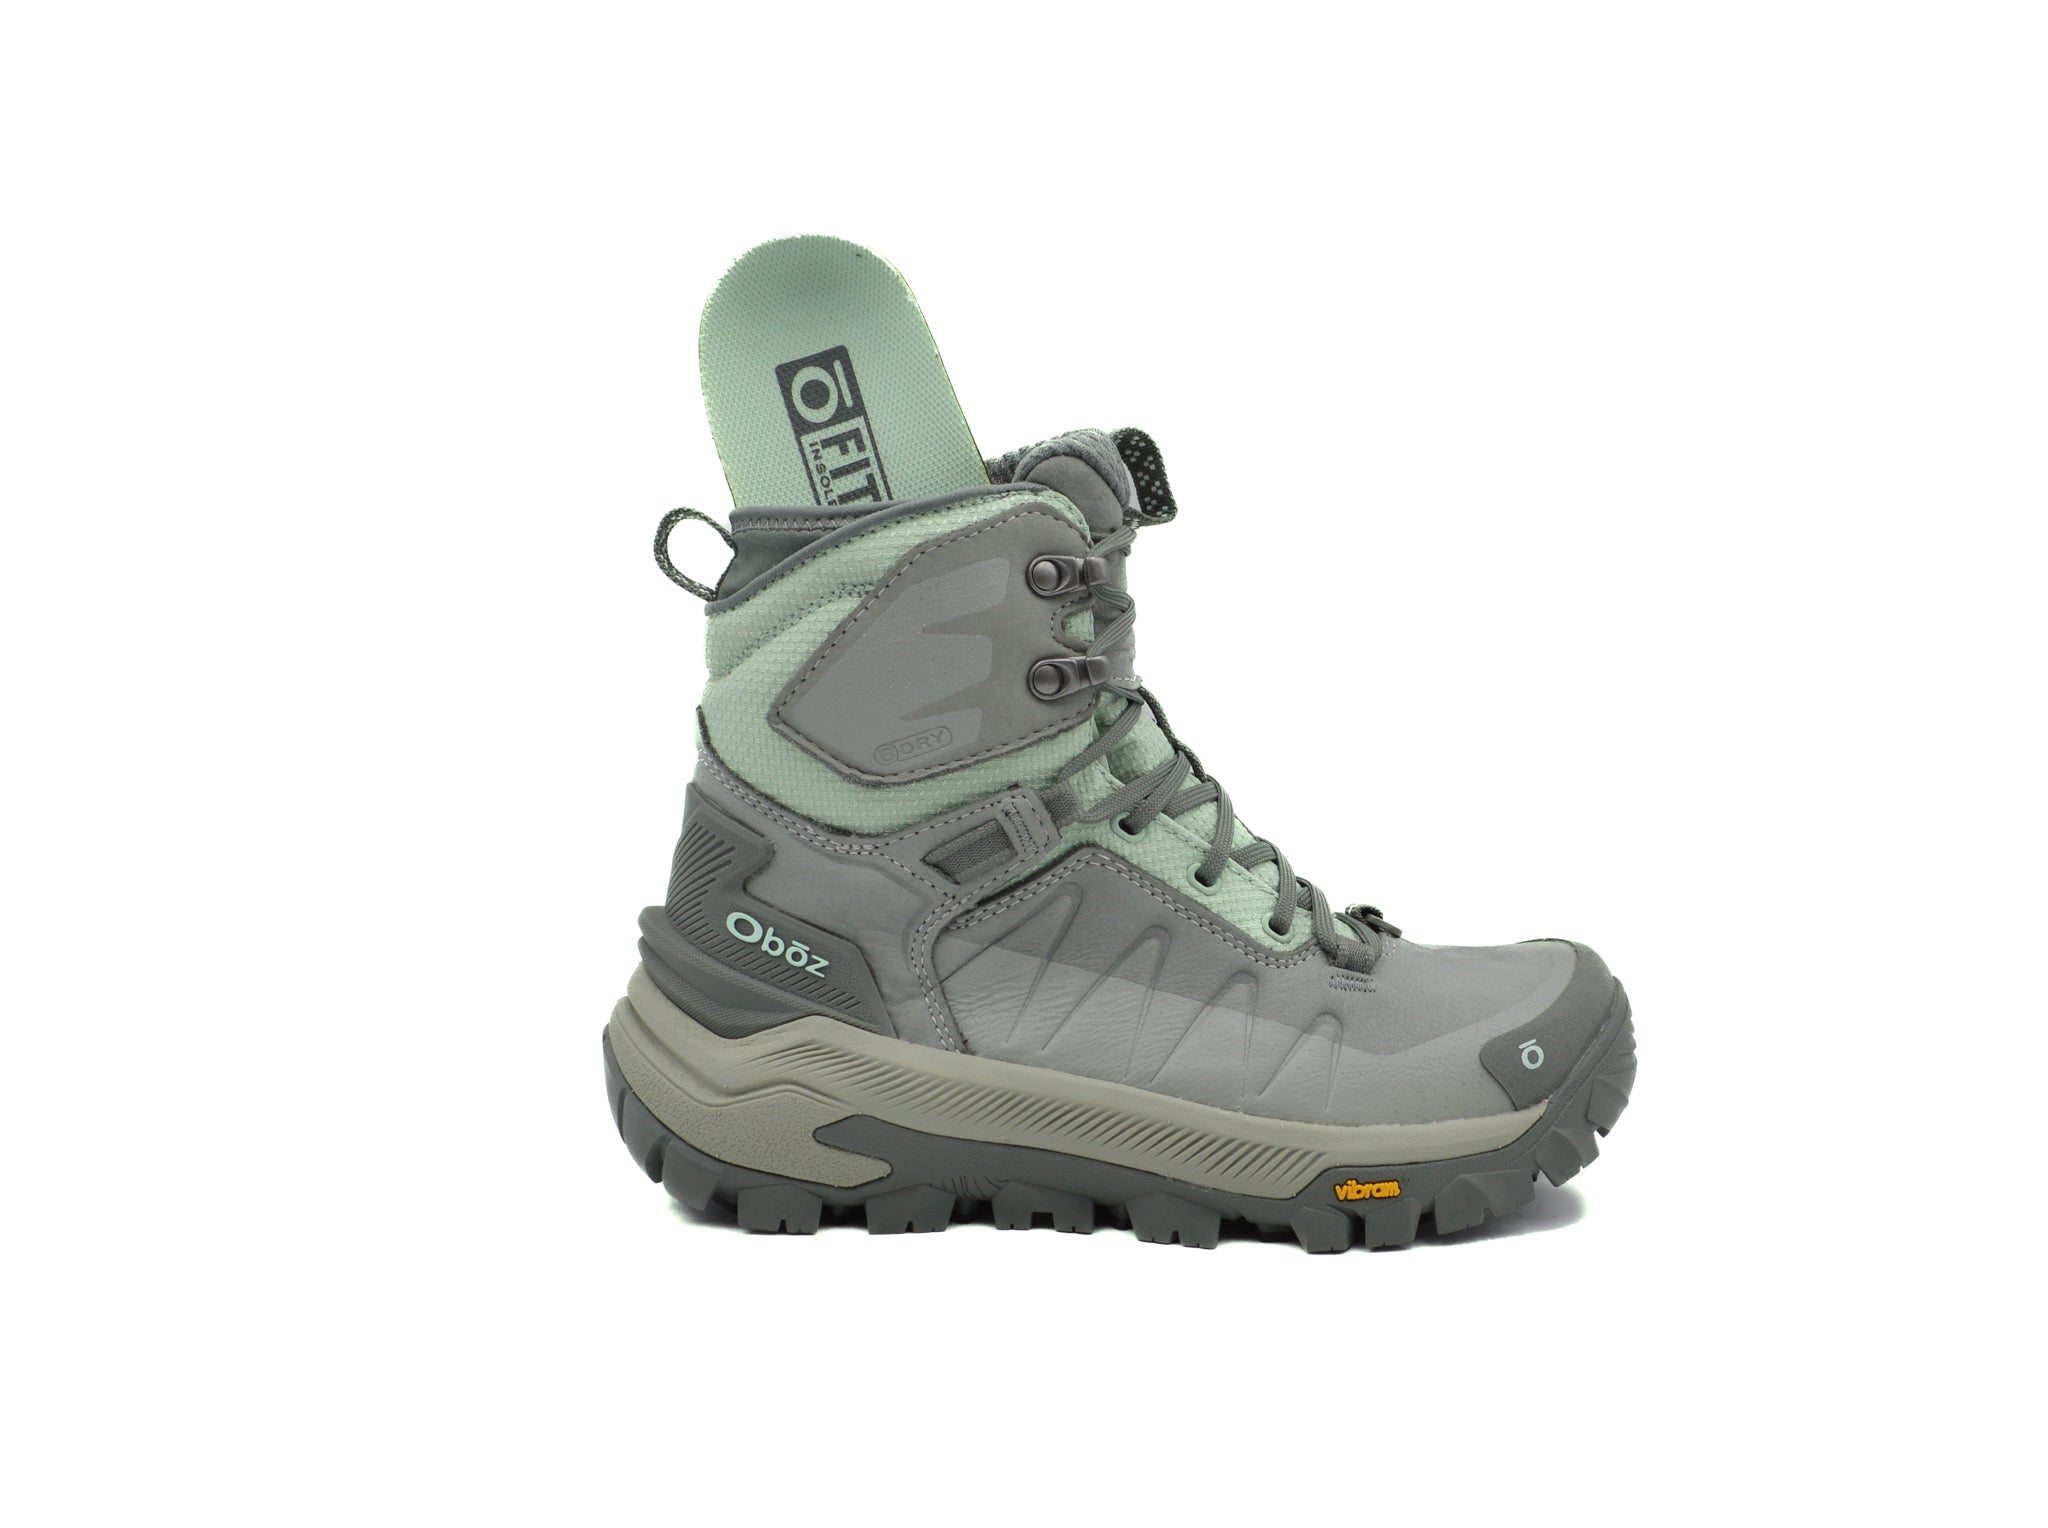 OBOZ Bangtail Mid Insulated Waterproof Boots